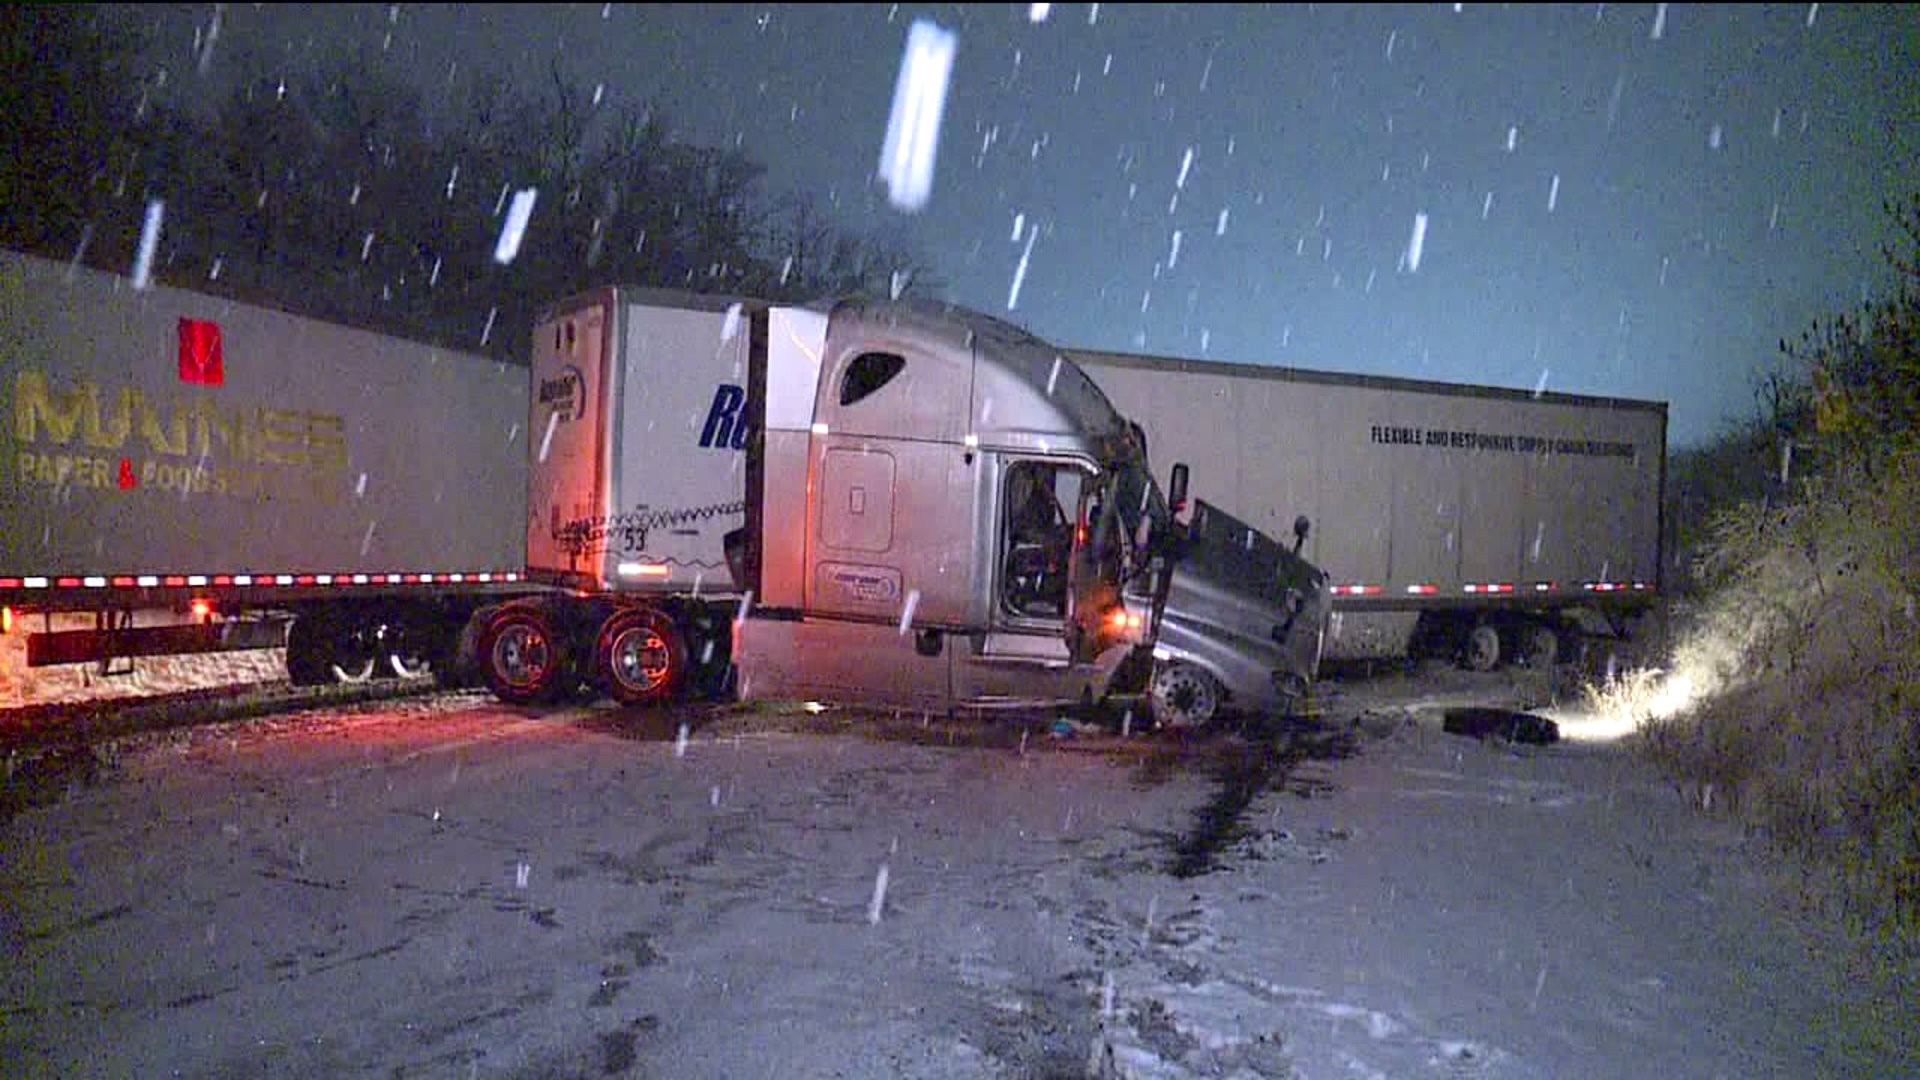 Wintry Weather Causes Crash in Luzerne County